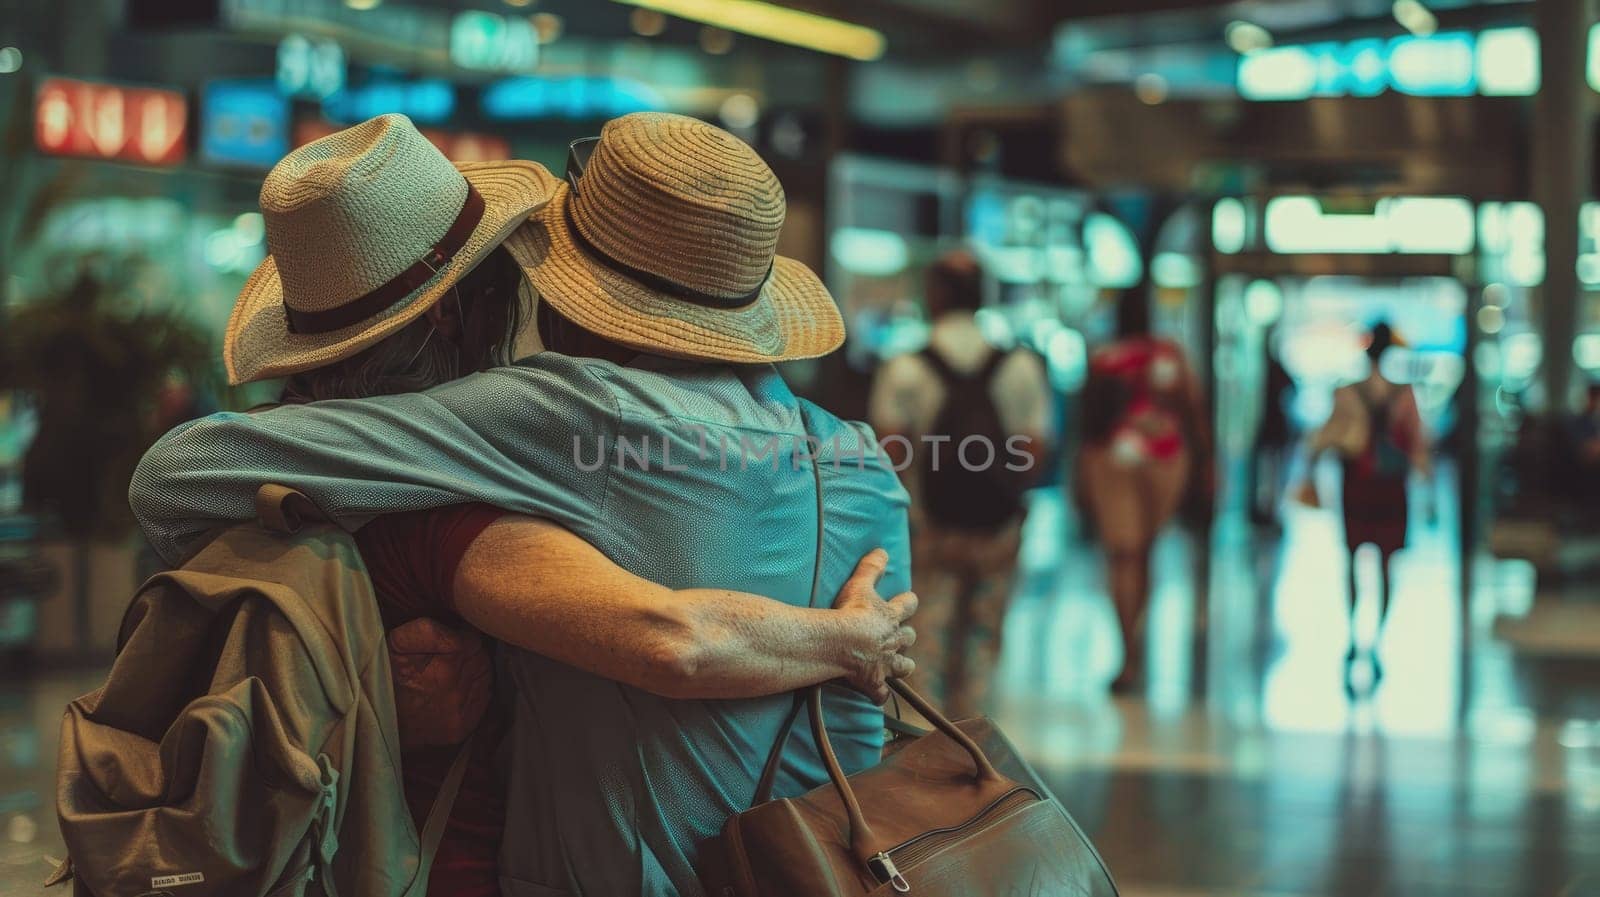 People at the airport hugging, Sharing a hug in airport, Until next time by nijieimu